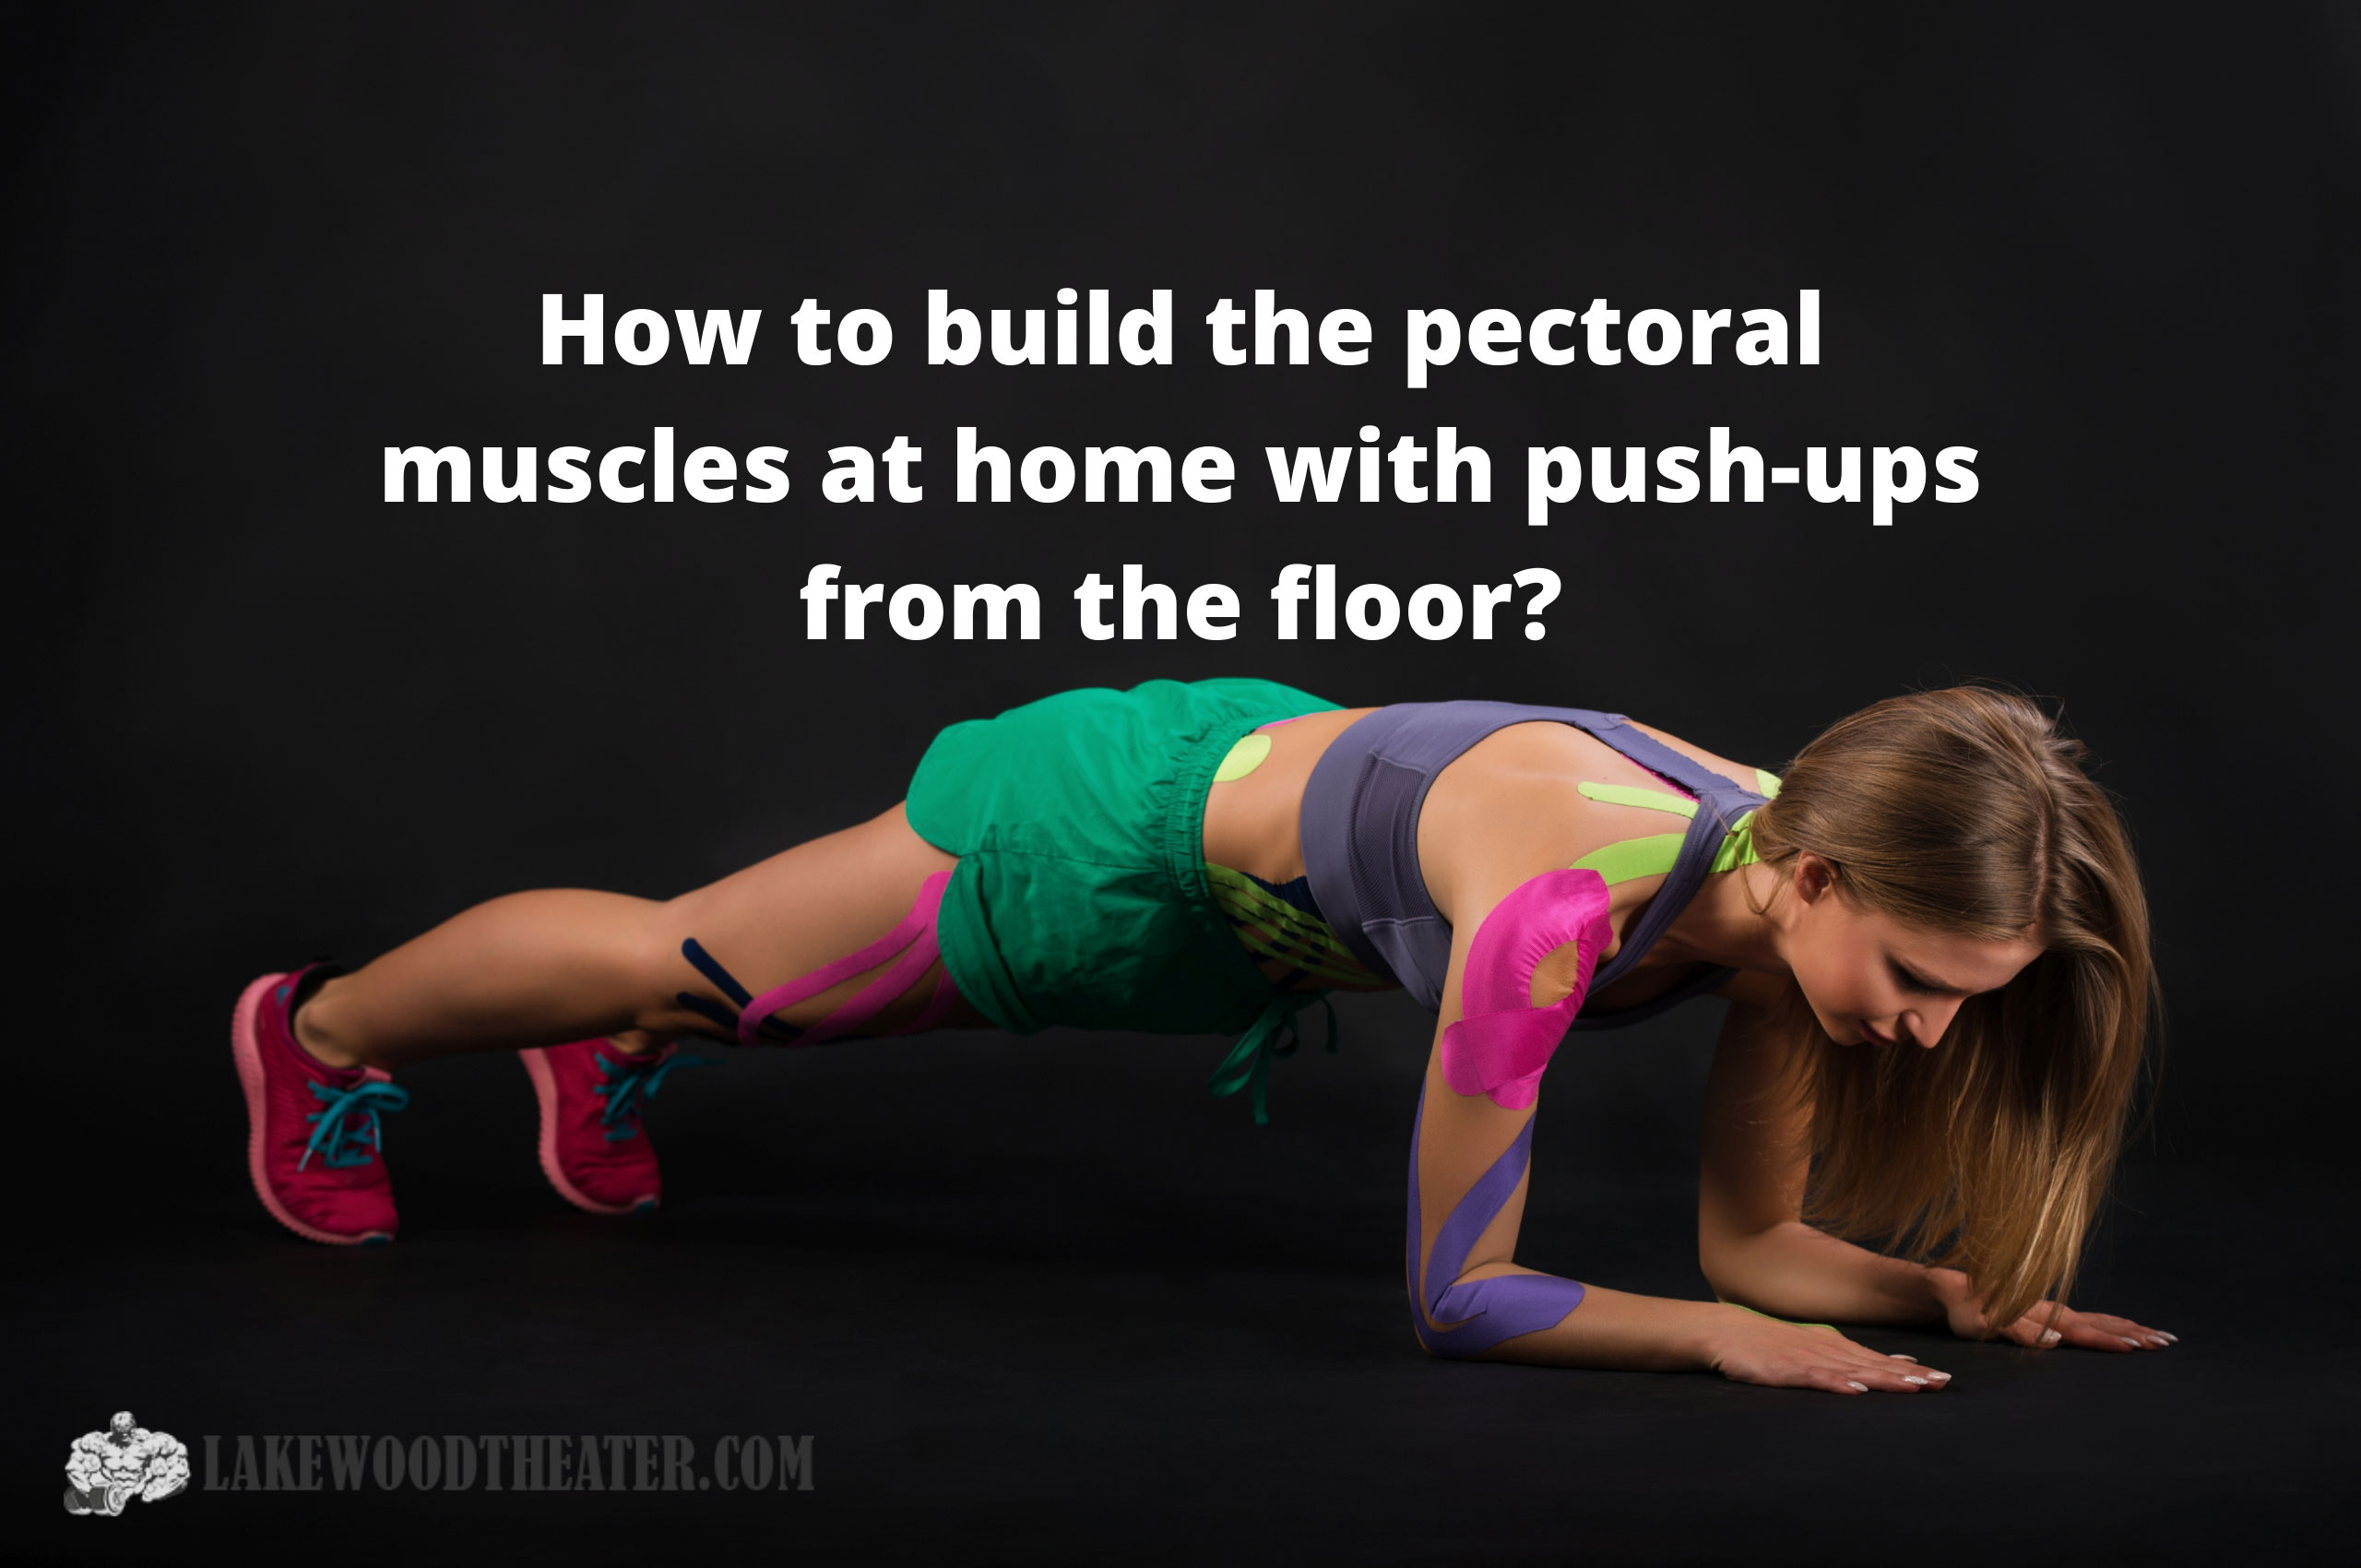 How to build the pectoral muscles at home with push-ups from the floor?